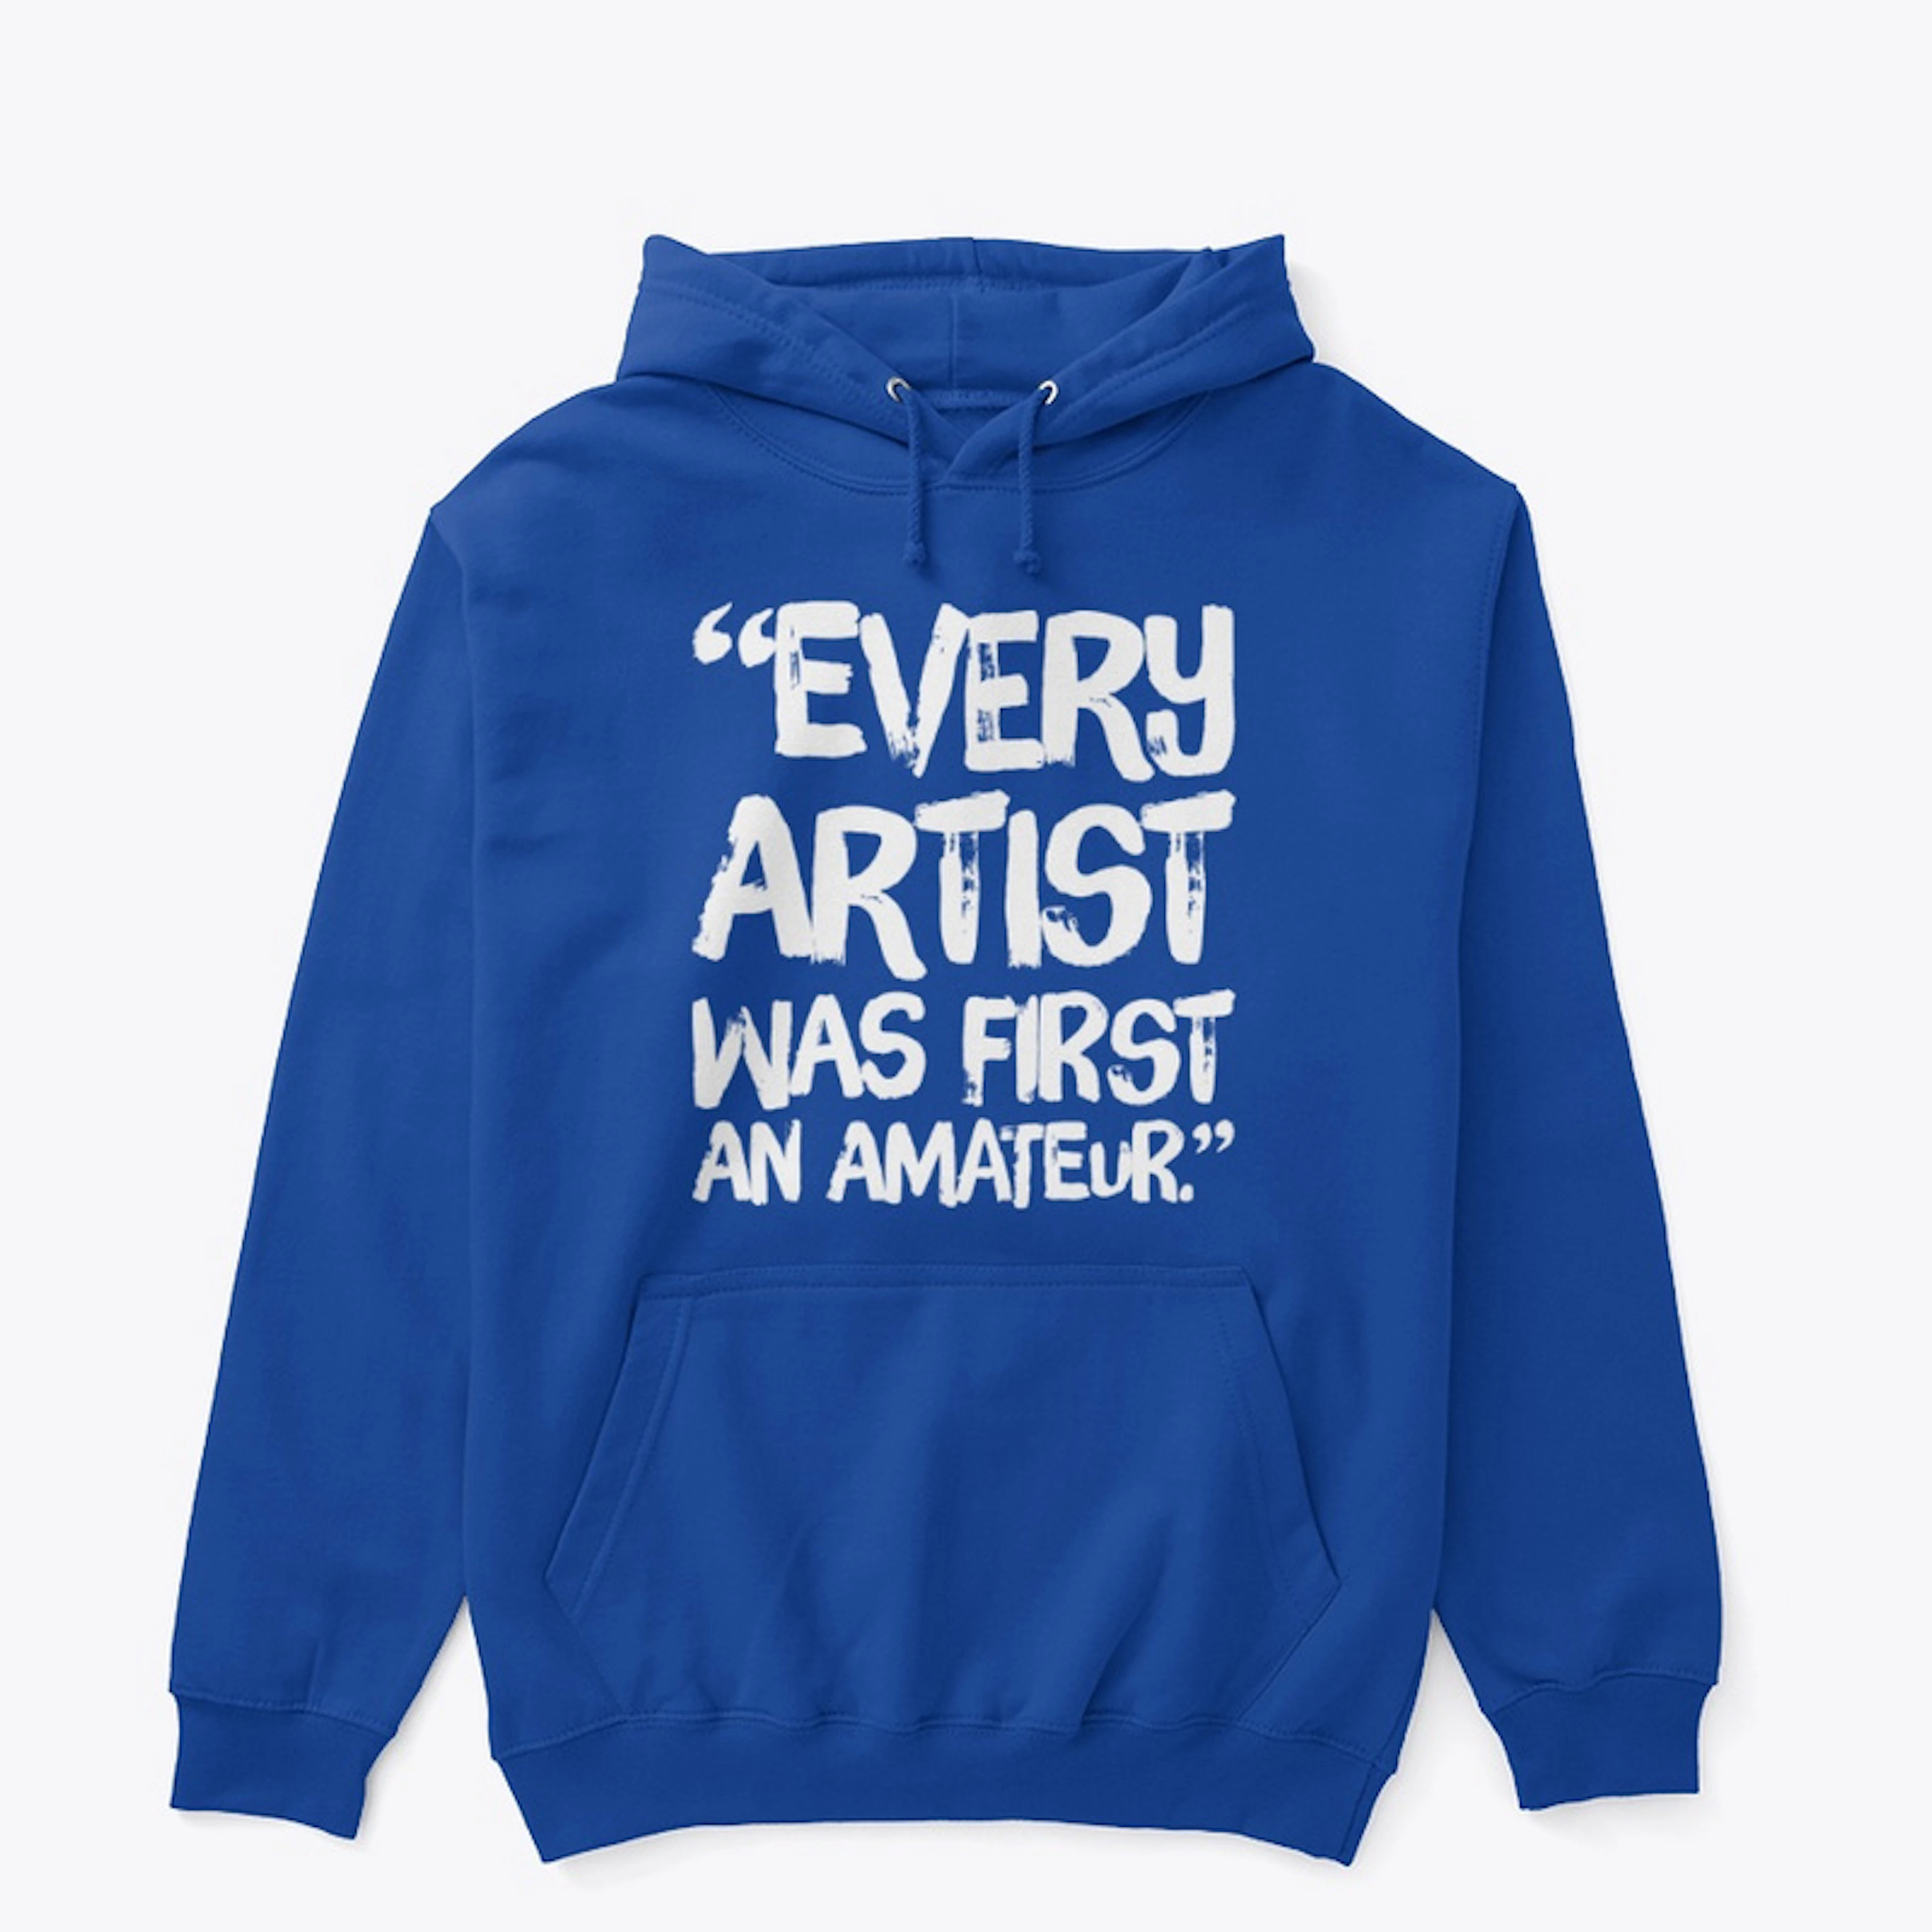 Every artist was first 